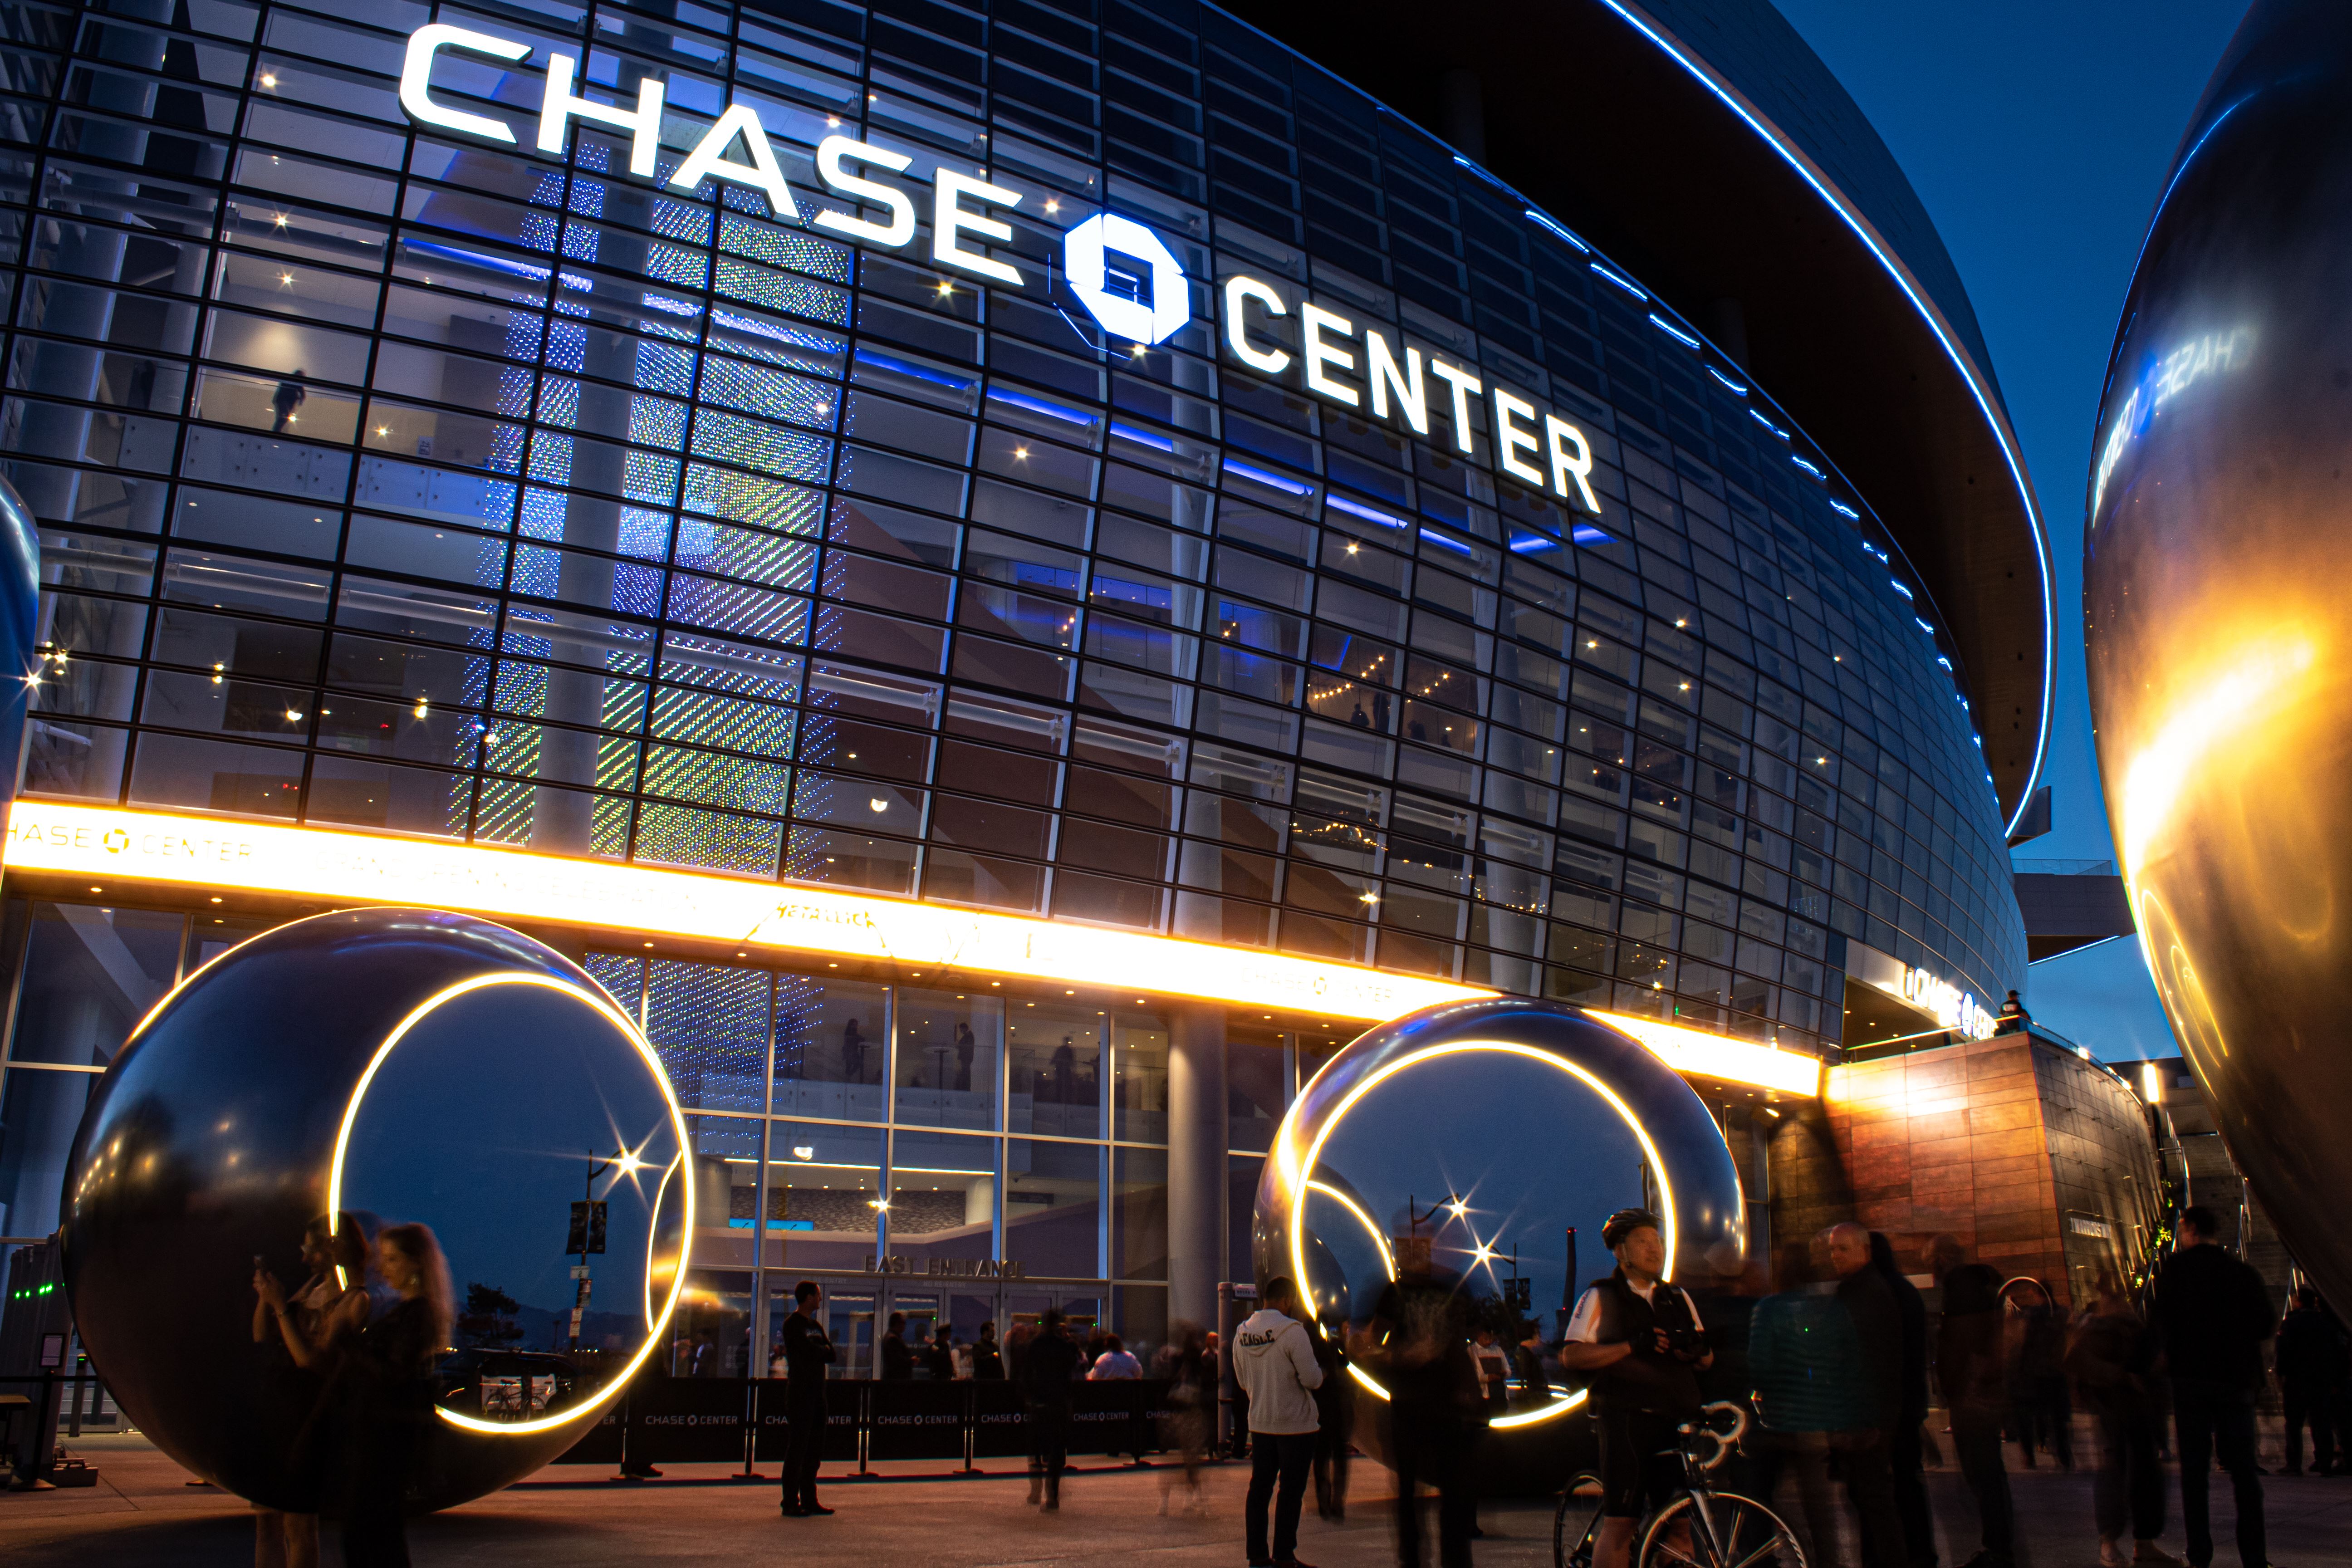 The exterior of Chase Center with a crowd of people outside 